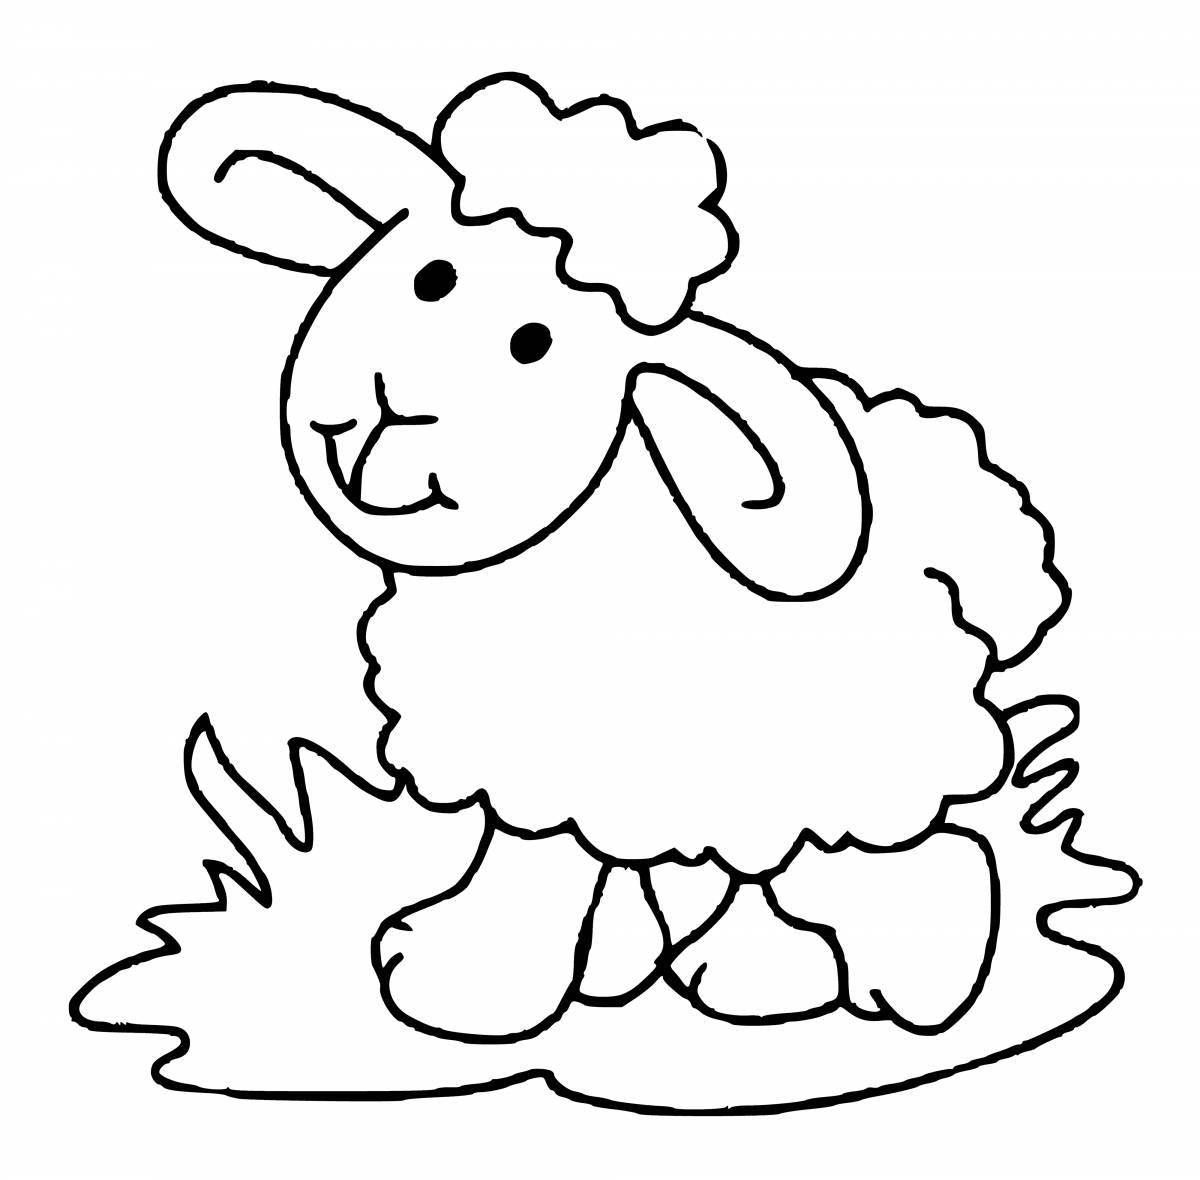 Radiant sheep coloring book for kids